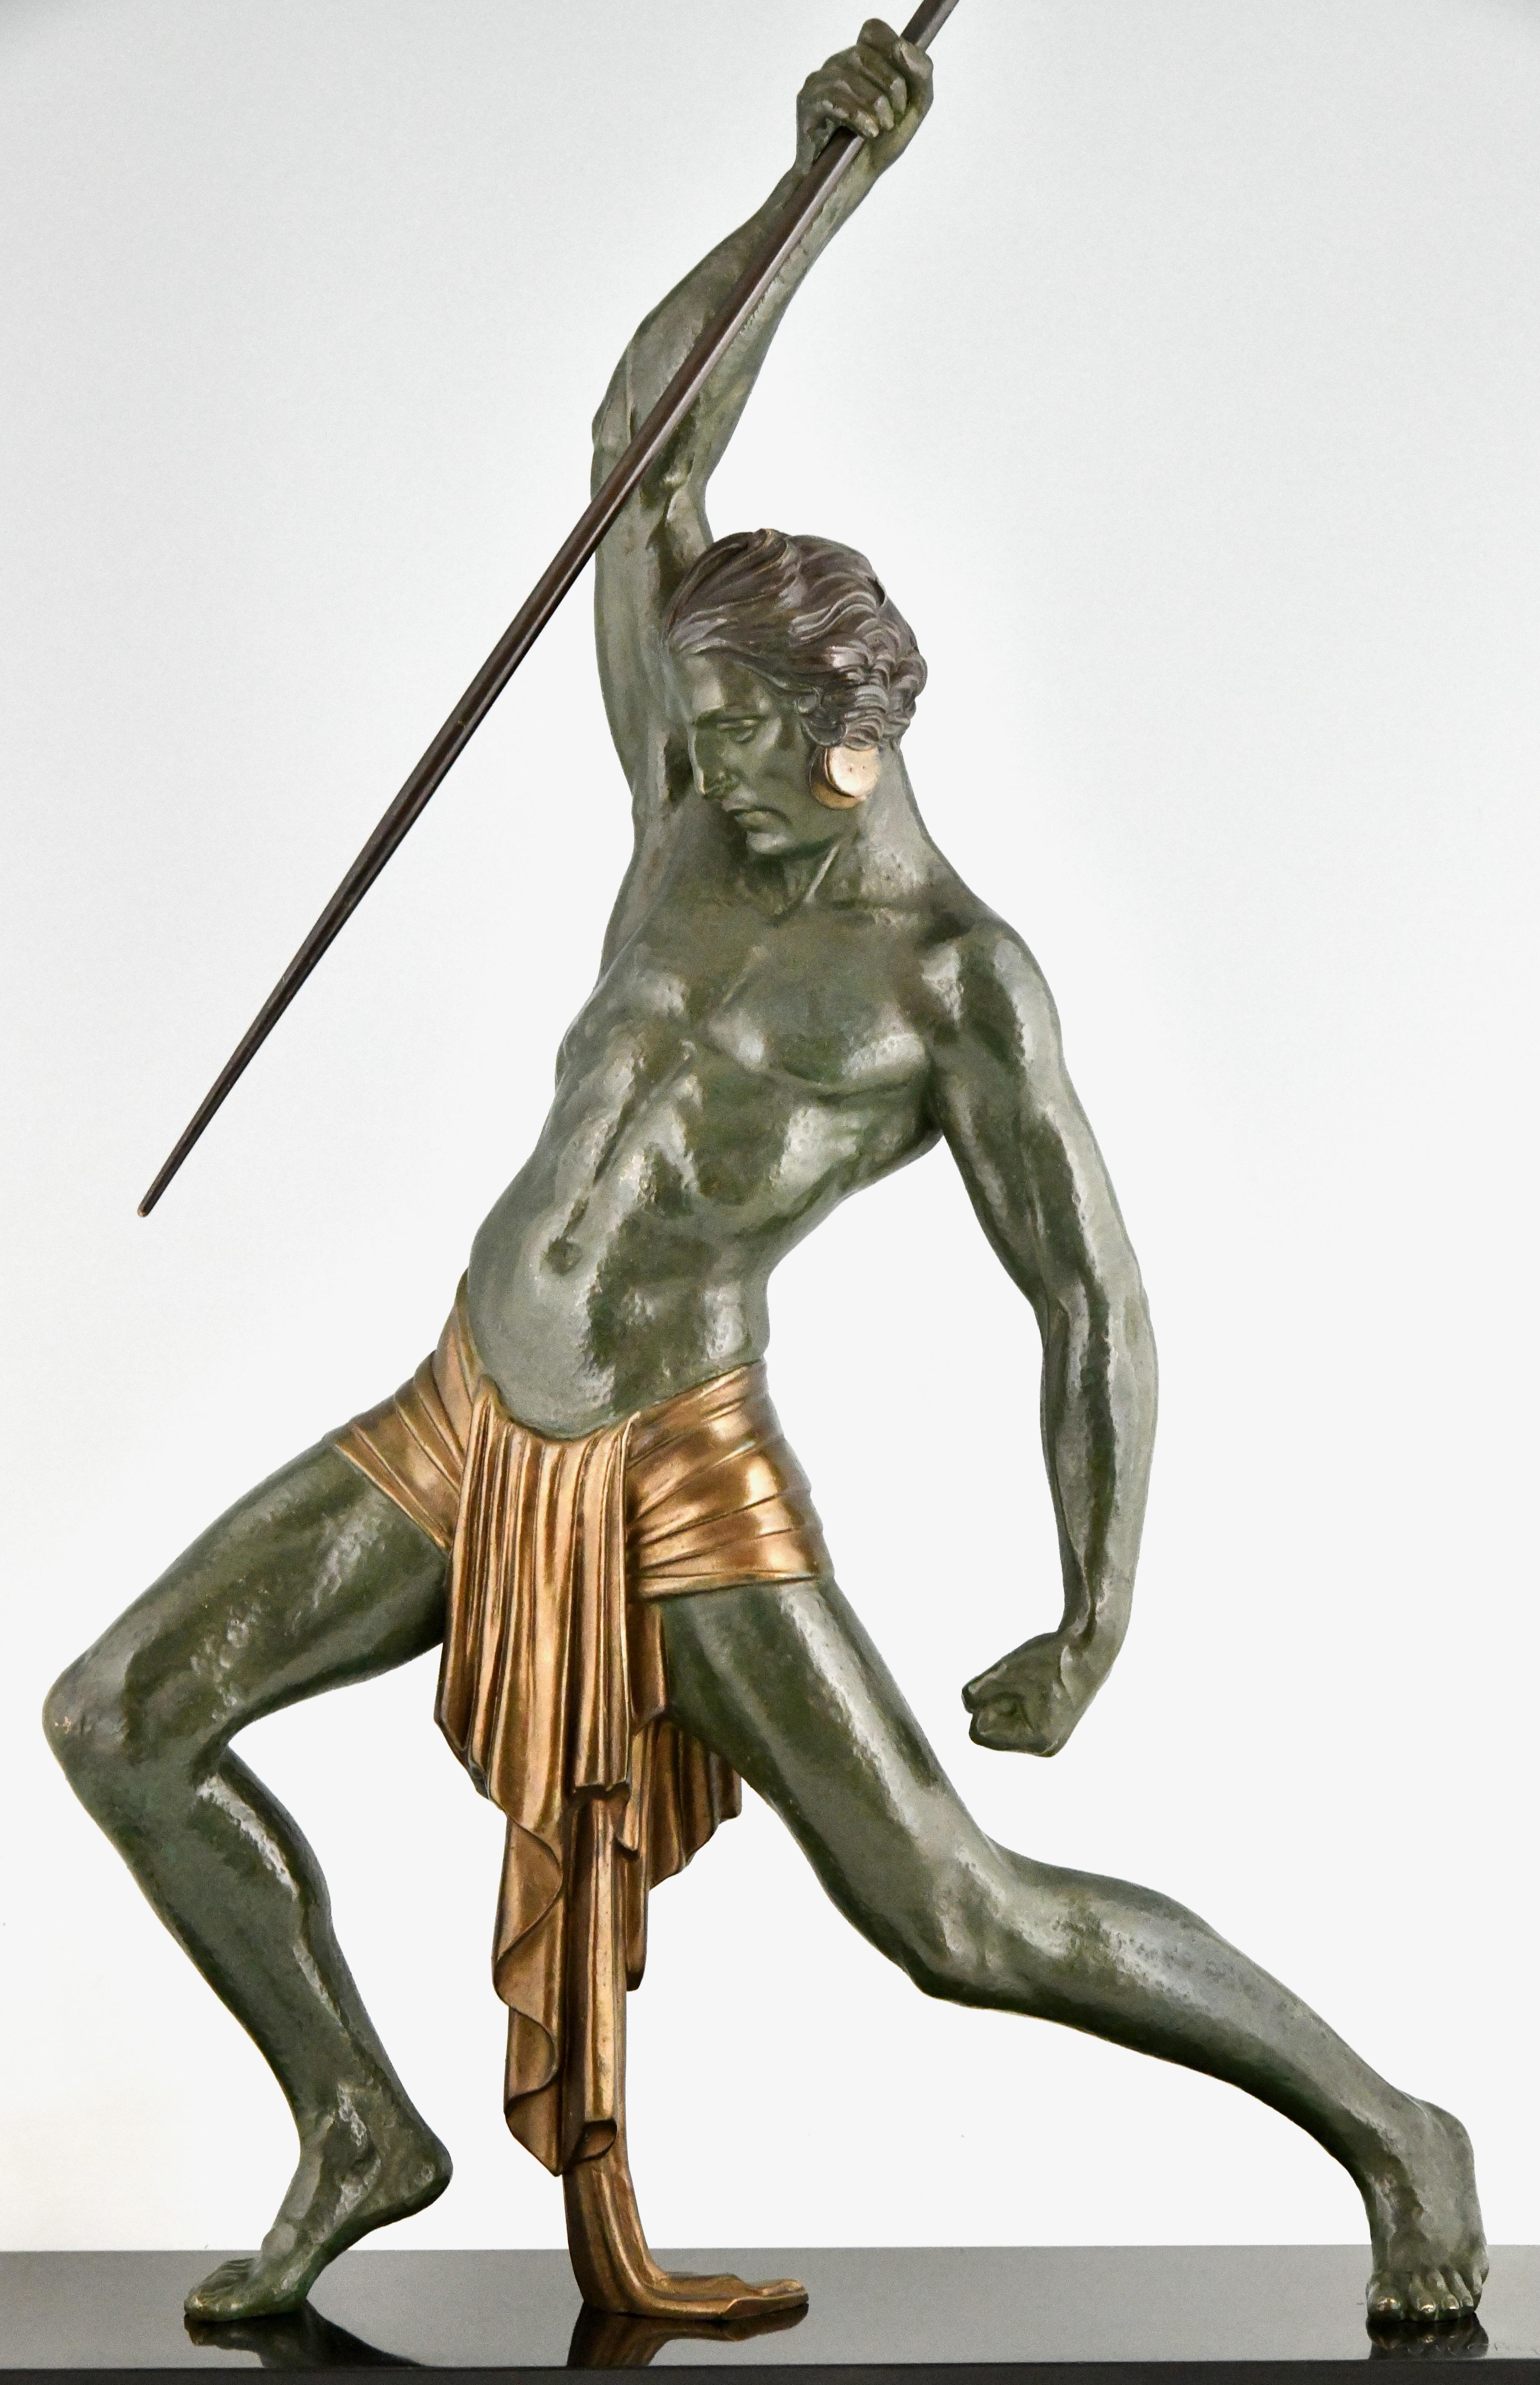 Art Deco sculpture man with spear by Demetre H. Chiparus.
Patinated Art Metal on a Belgian Black marble base.  
France 1934. 
This model called The Hunter is illustrated 3 times in the book:
Chiparus, Master of Art Deco, A. Shayo,
H. 87.5 including